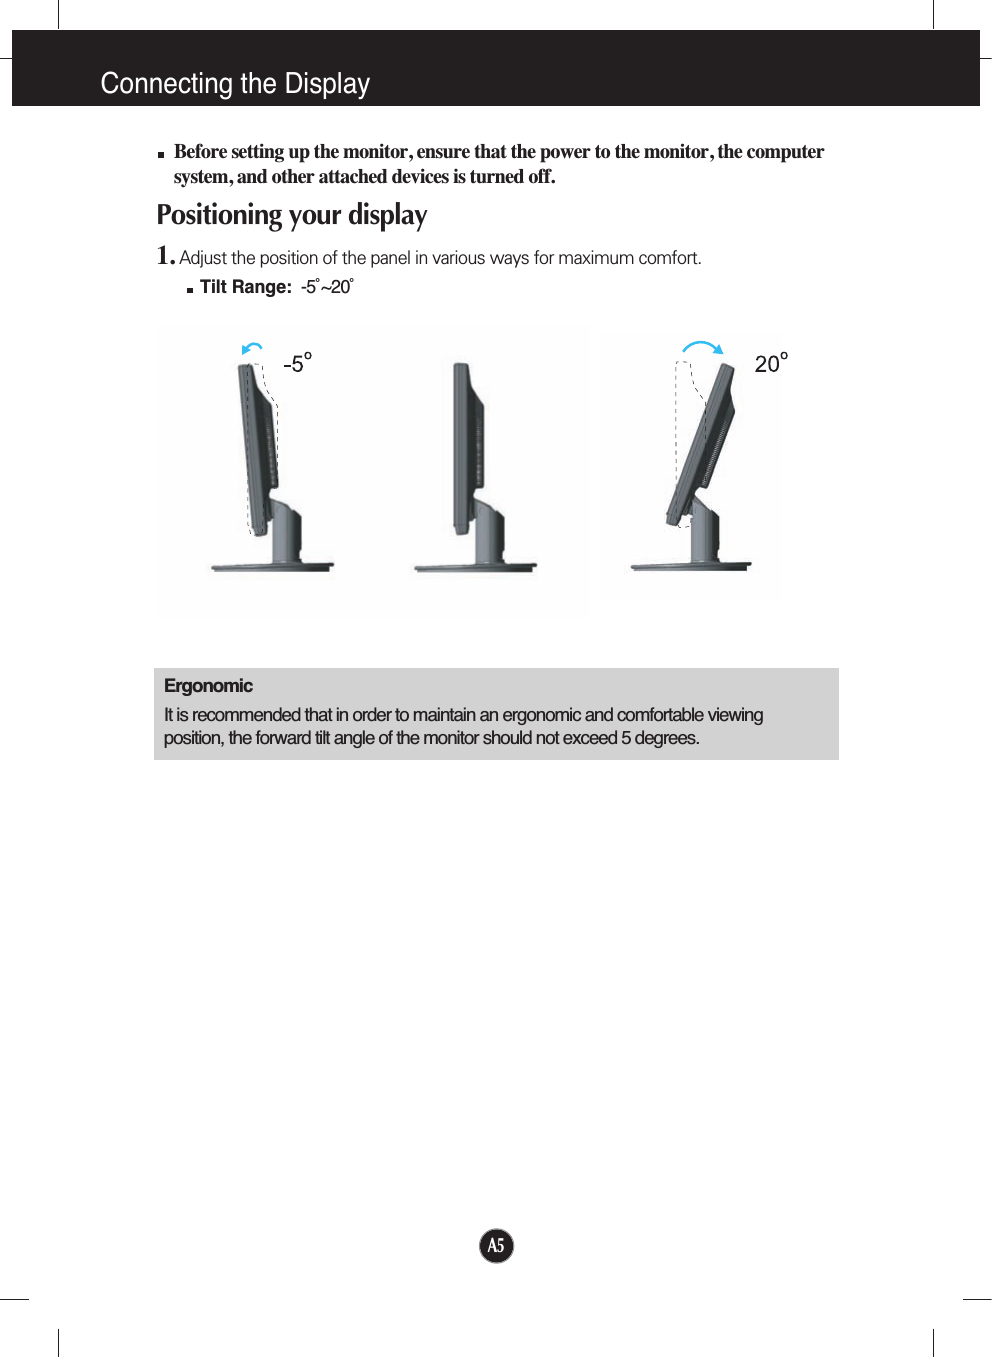 A5Connecting the DisplayBefore setting up the monitor, ensure that the power to the monitor, the computersystem, and other attached devices is turned off. Positioning your display1. Adjust the position of the panel in various ways for maximum comfort.Tilt Range: -5˚~20˚ ErgonomicIt is recommended that in order to maintain an ergonomic and comfortable viewingposition, the forward tilt angle of the monitor should not exceed 5 degrees.